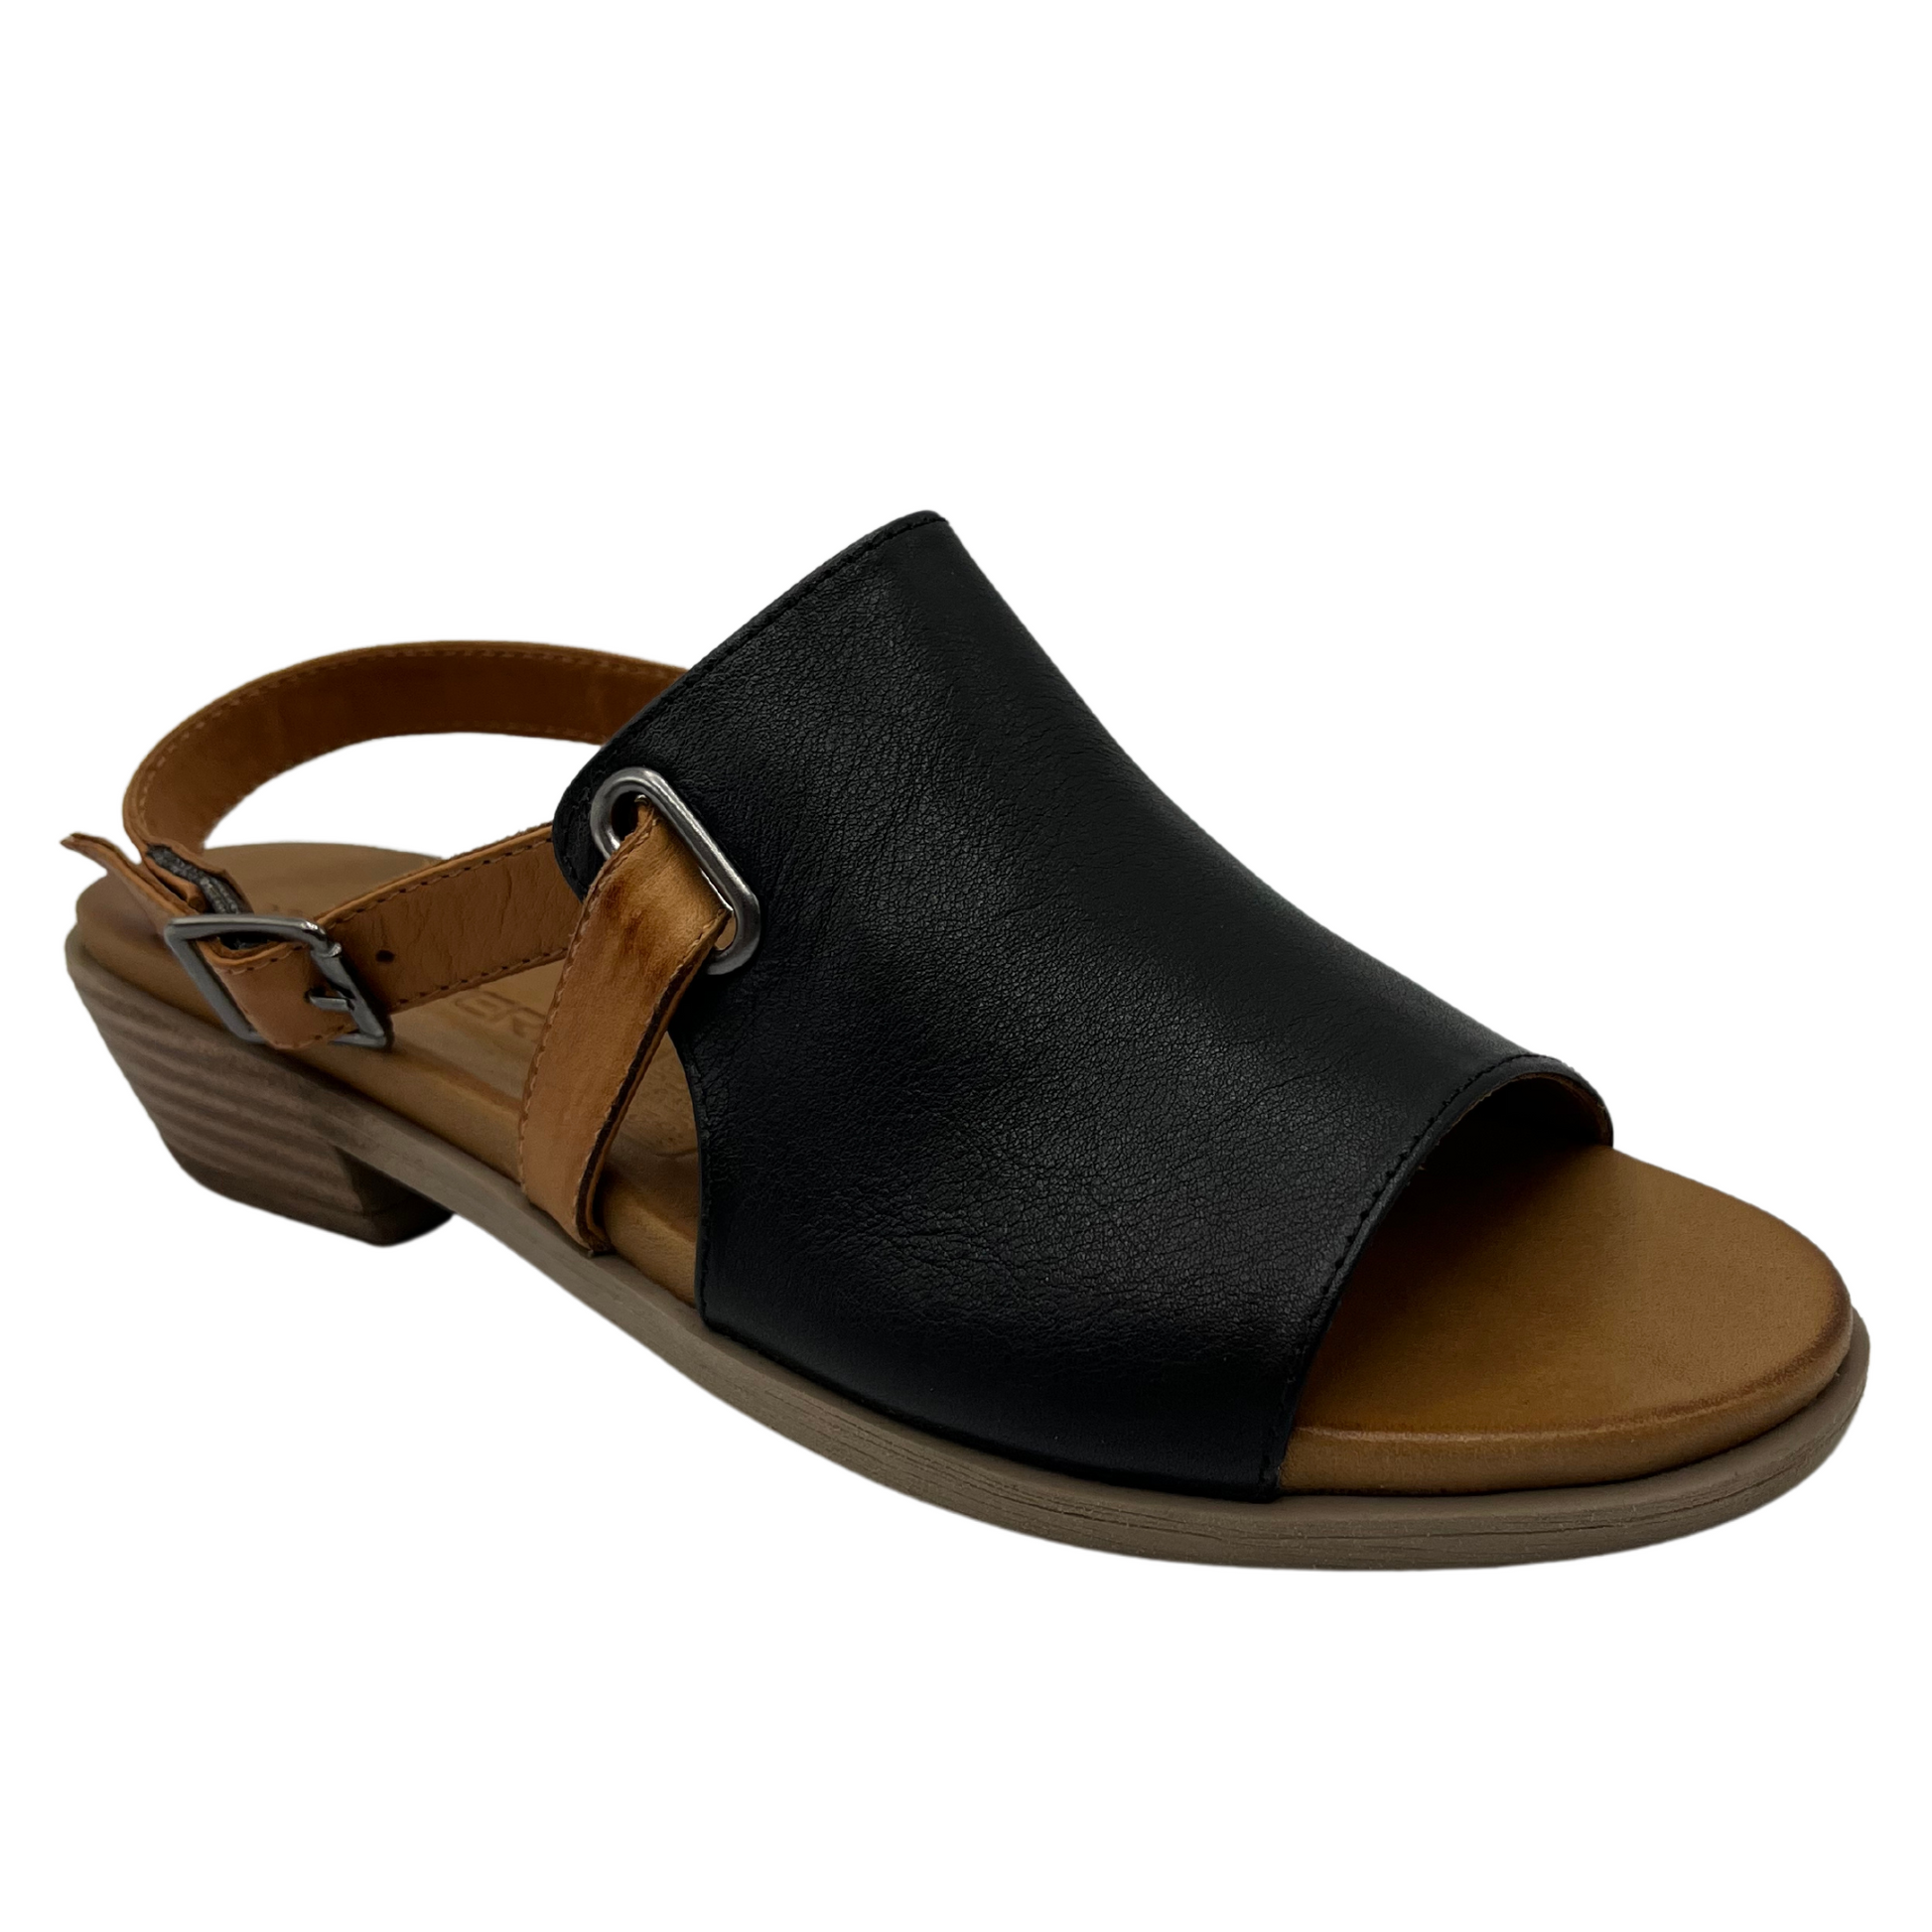 45 degree angled view of black leather sandal with low heel and brown strap